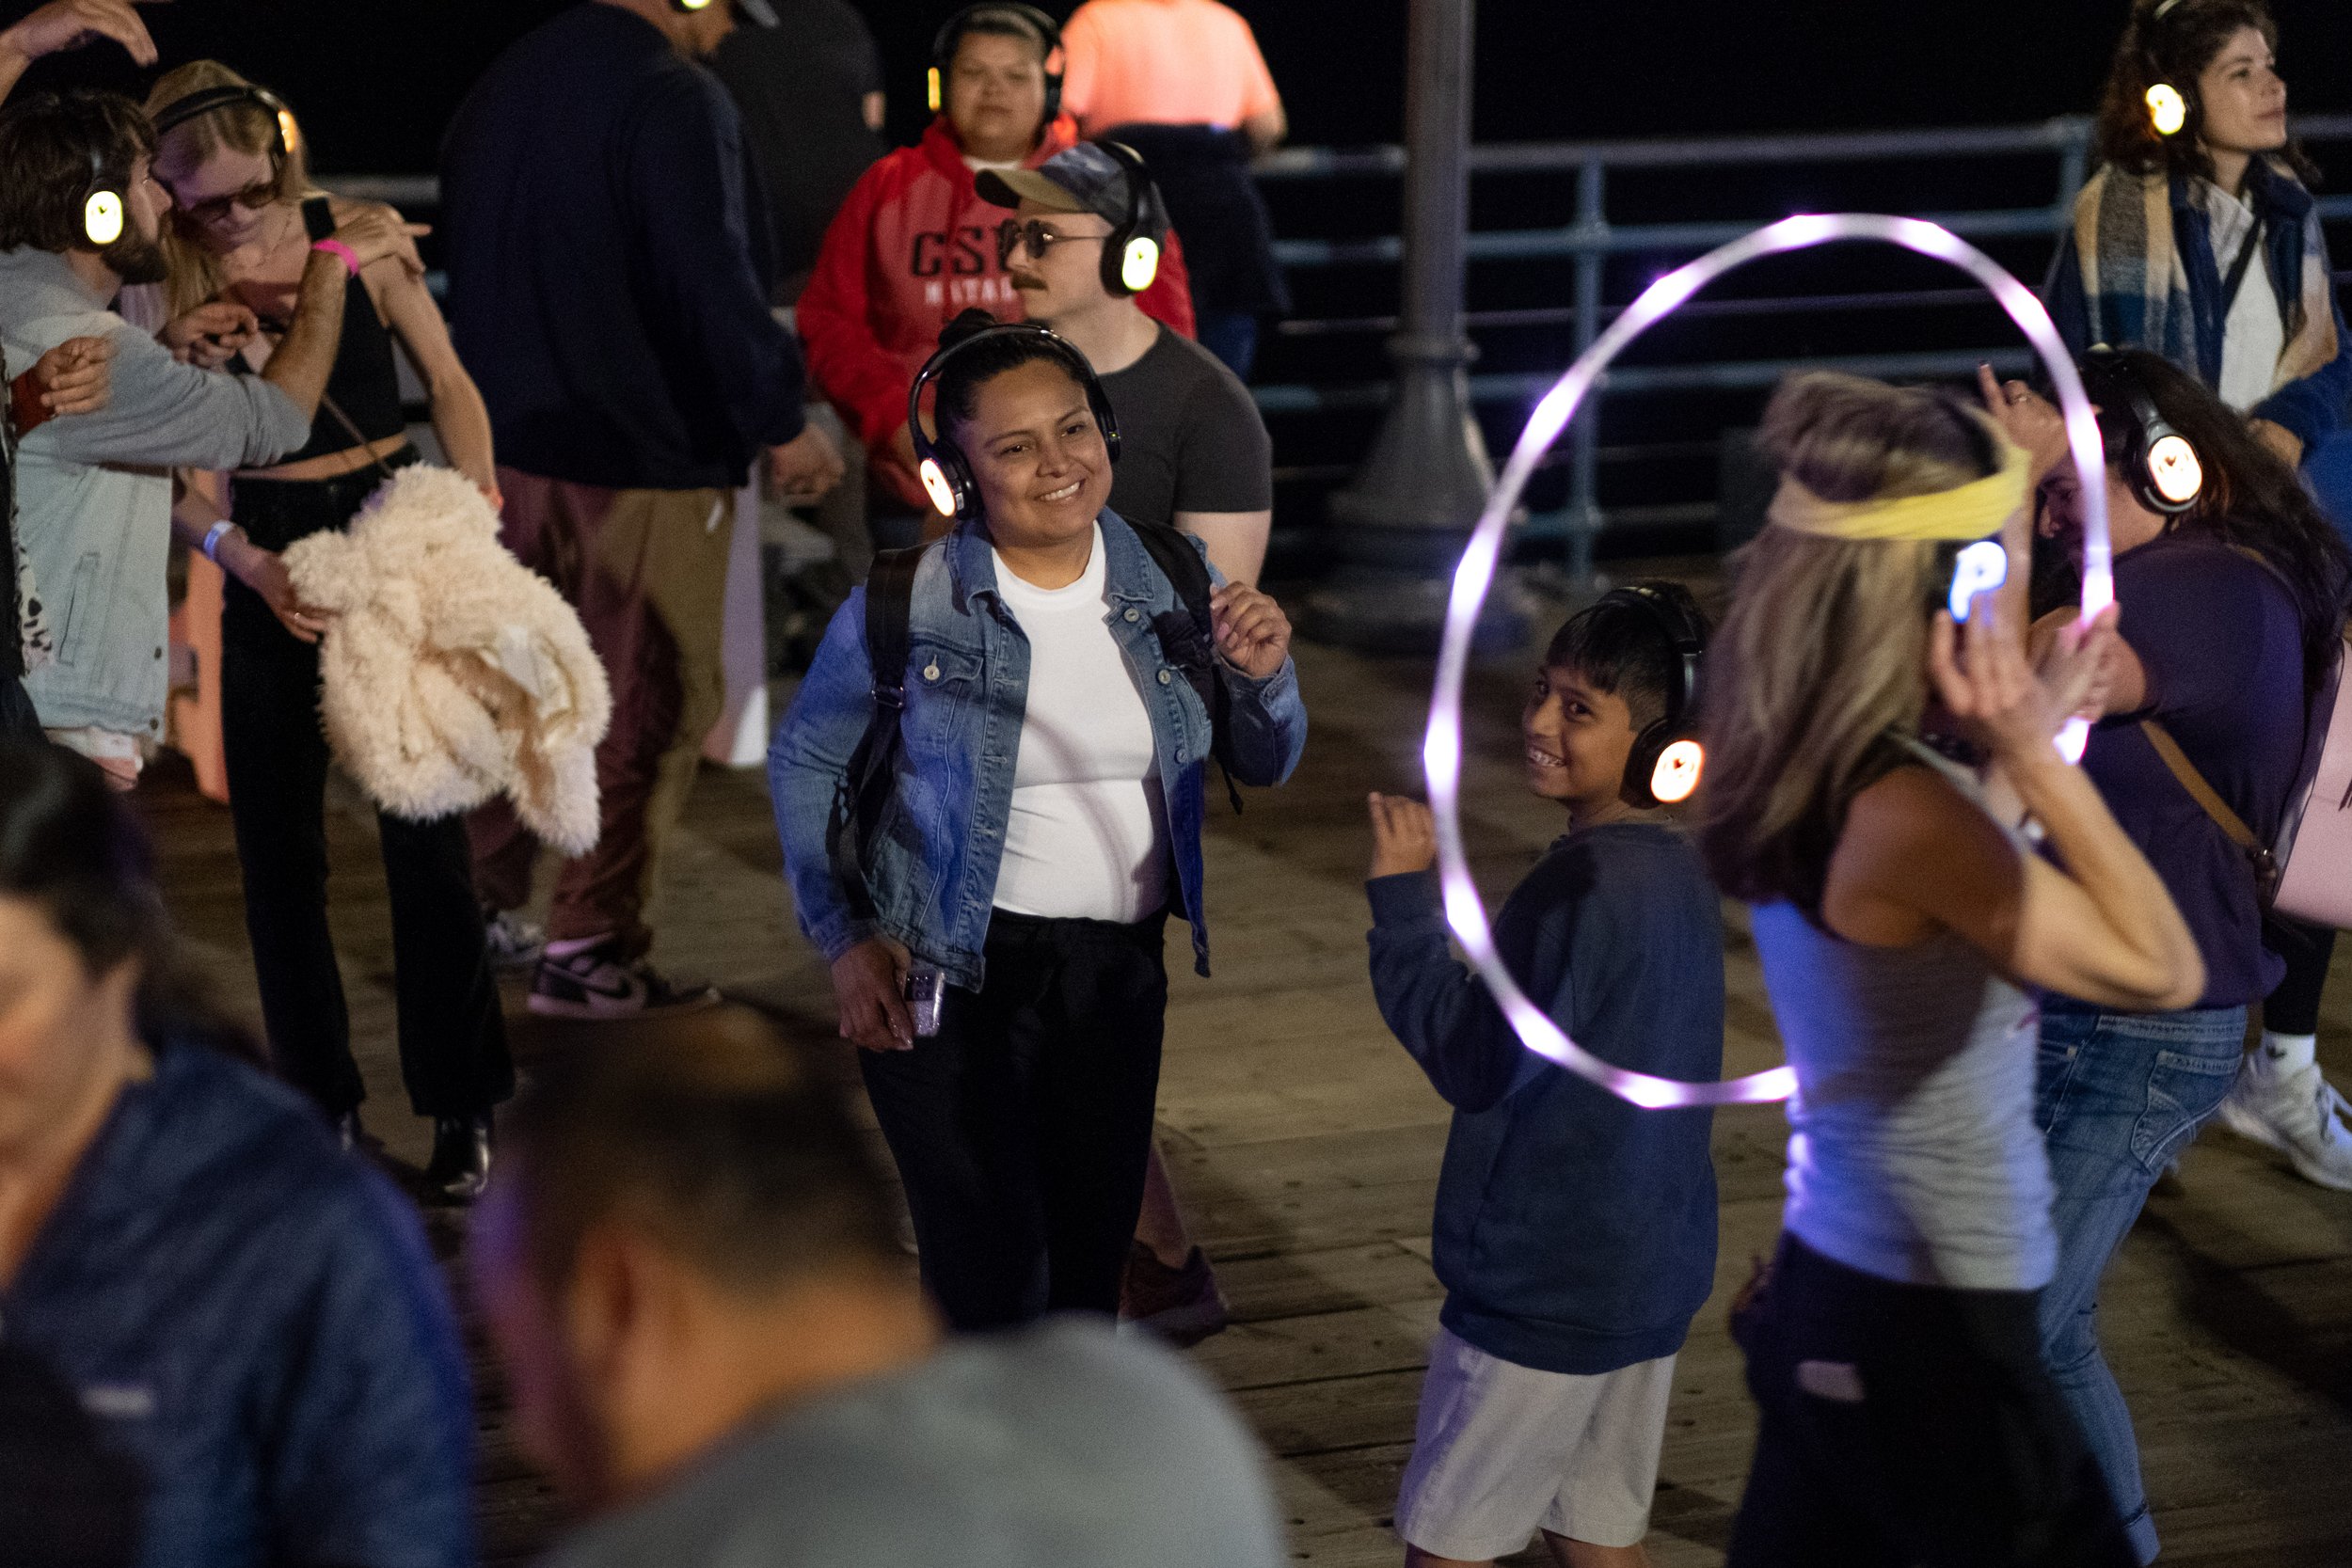  Dancers wore brightly lit up headphones to enjoy the Sunset Vibes Silent Disco at Locals' Night on Thursday, April 20, 2023 on the Santa Monica Pier at the West End of the pier in Santa Monica, Calif. The pier hosts Locals' Night every third Thursda